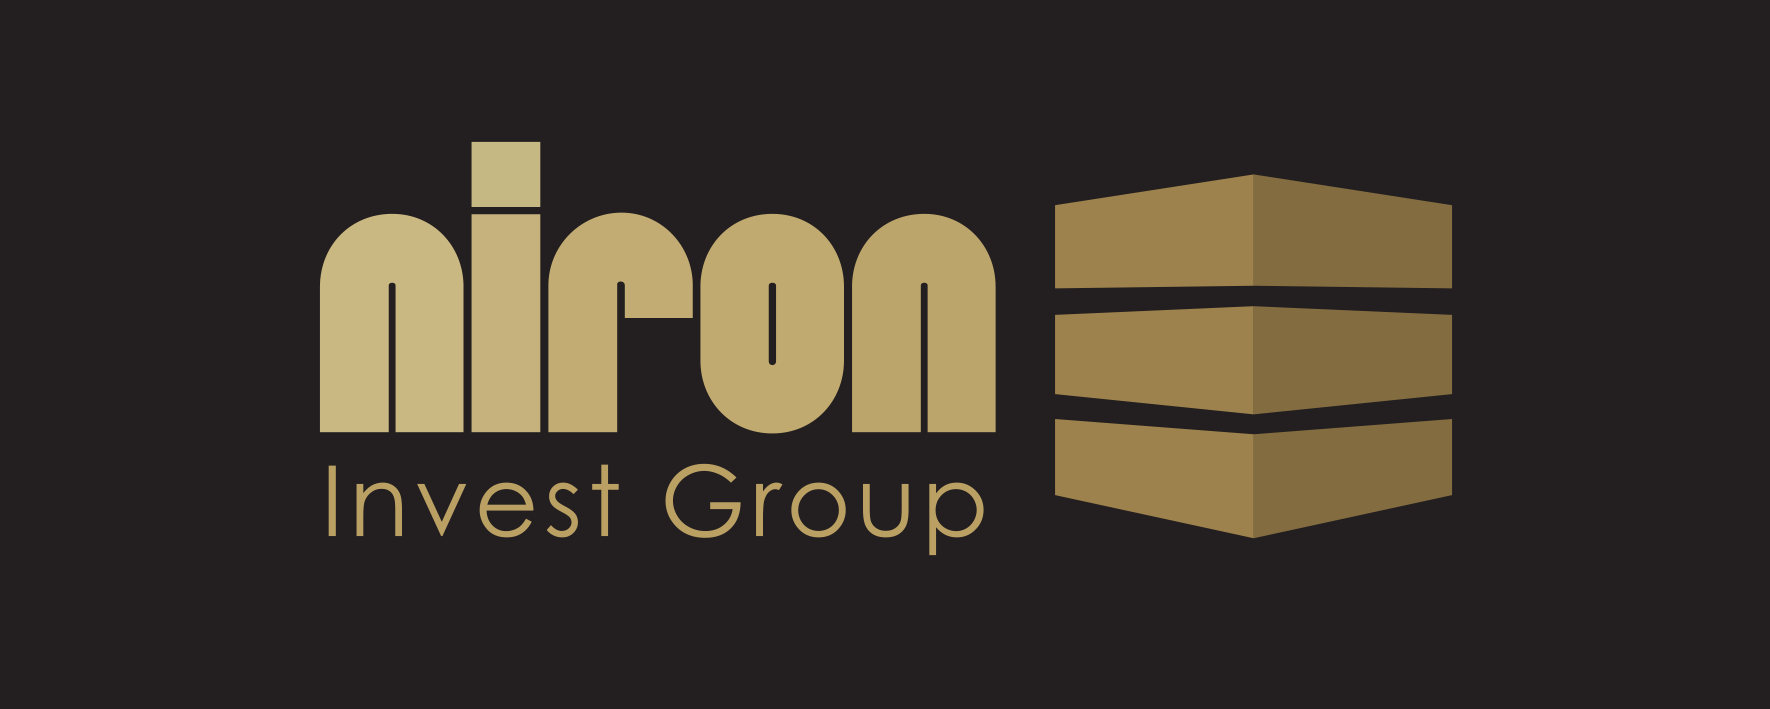 Niron Invest Group